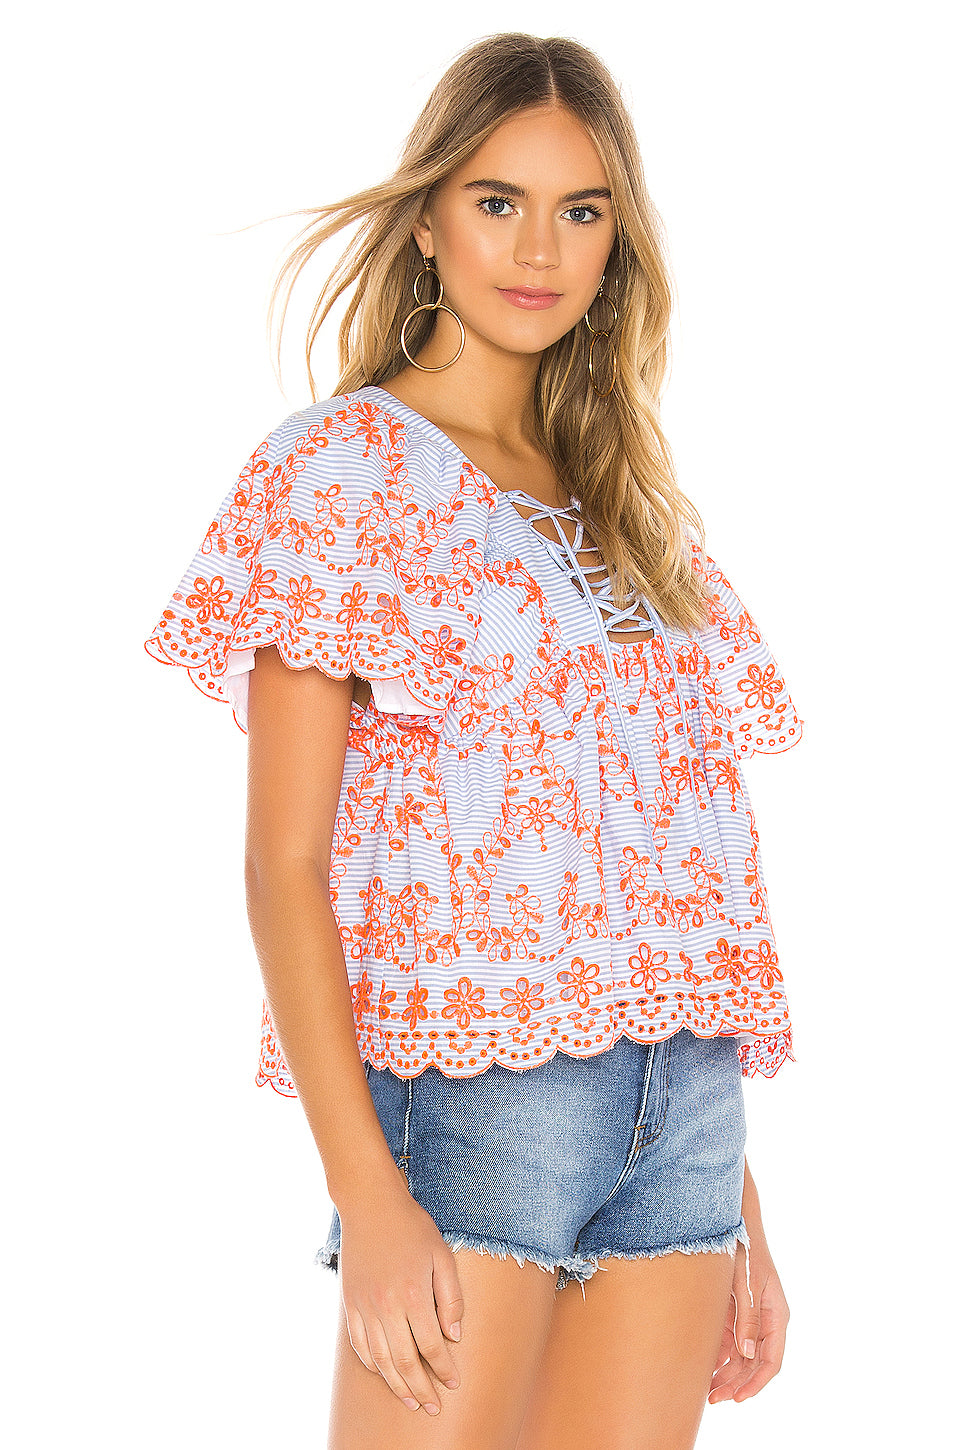 Daisy Embroidered Top in BLUE & ORANGE